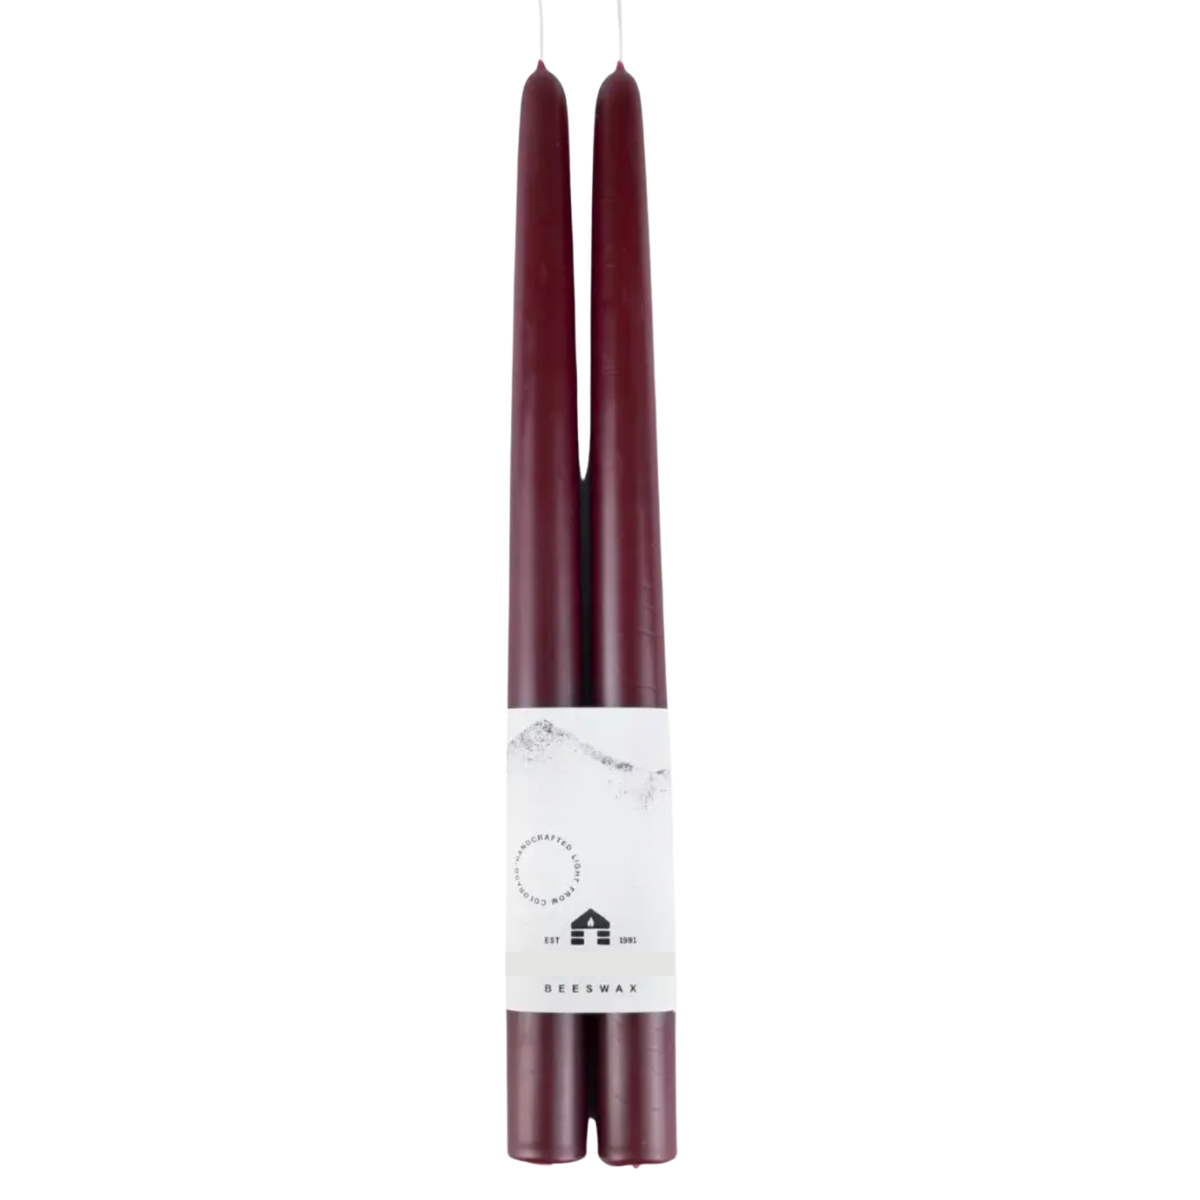 Burgundy Hand-Dipped Beeswax Taper Candles